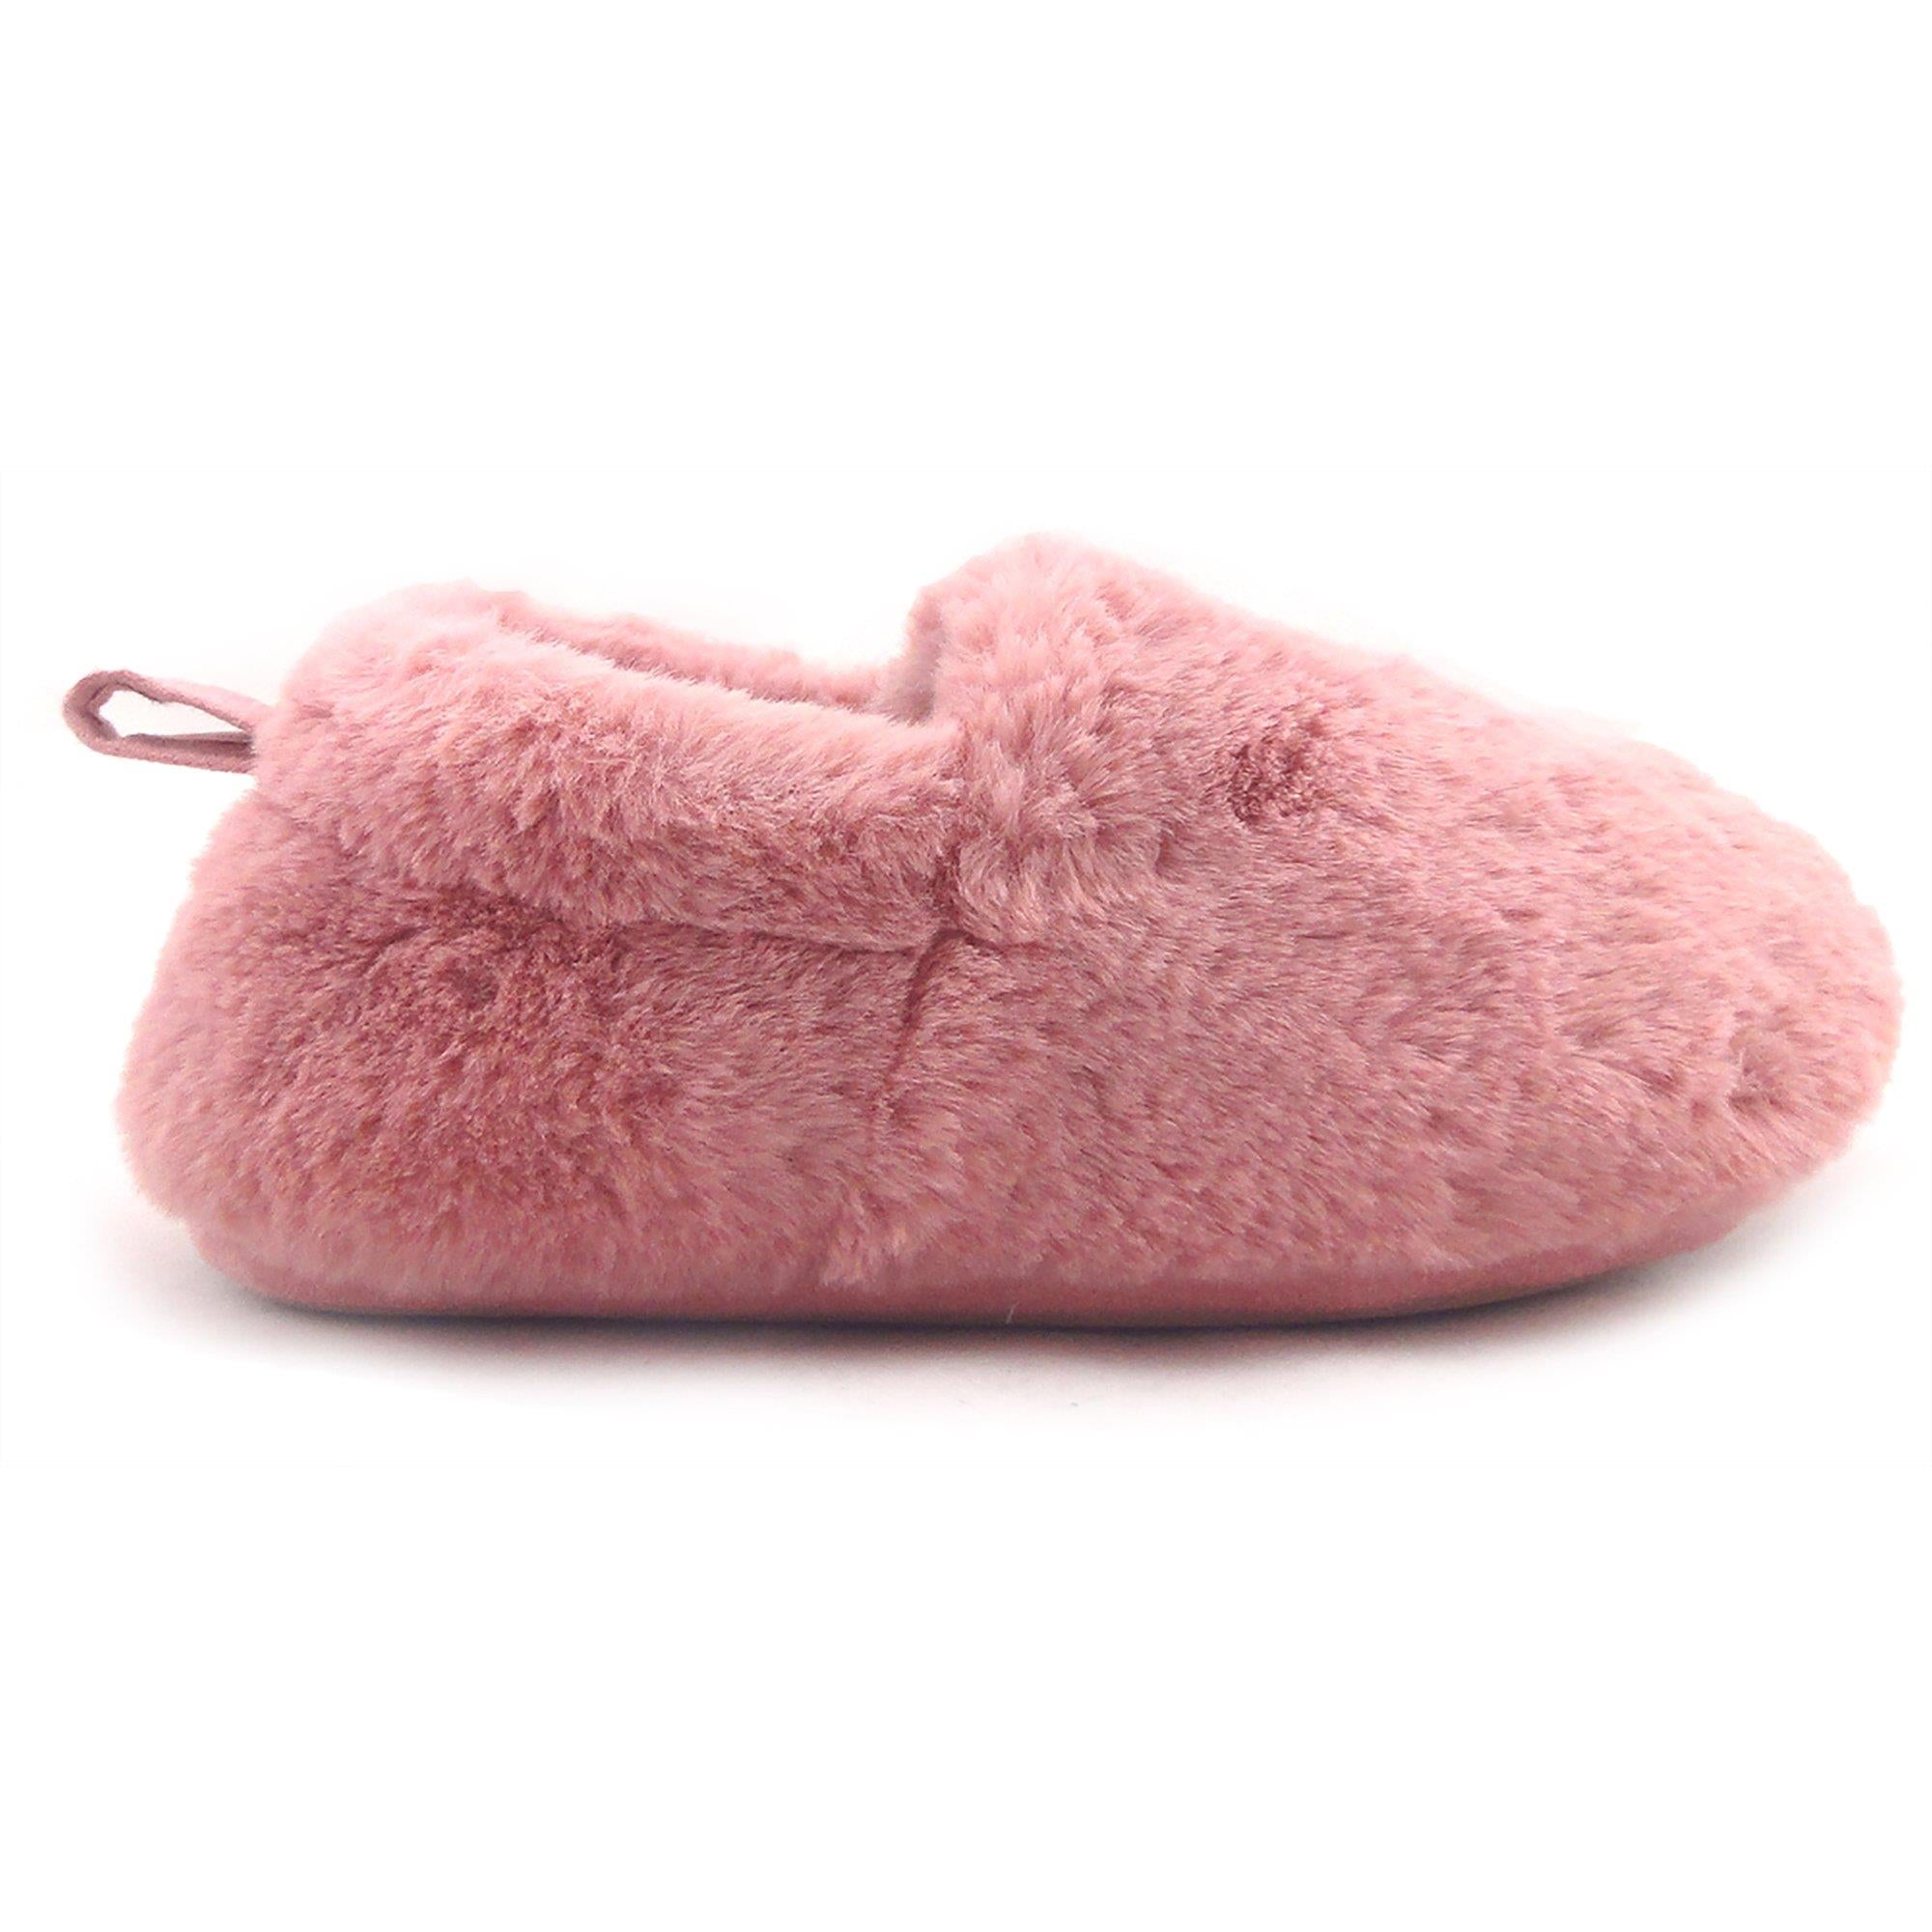 Totes Toasties Moccasin Slippers